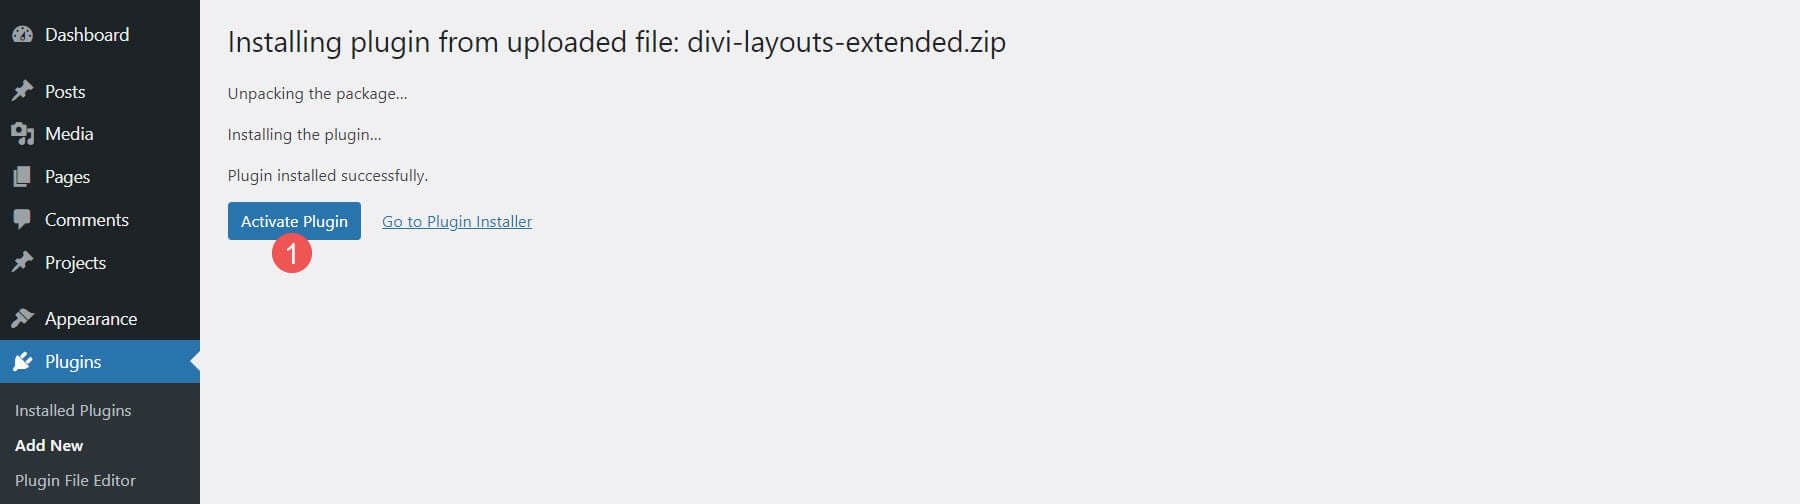 Installing Divi Layouts Extended